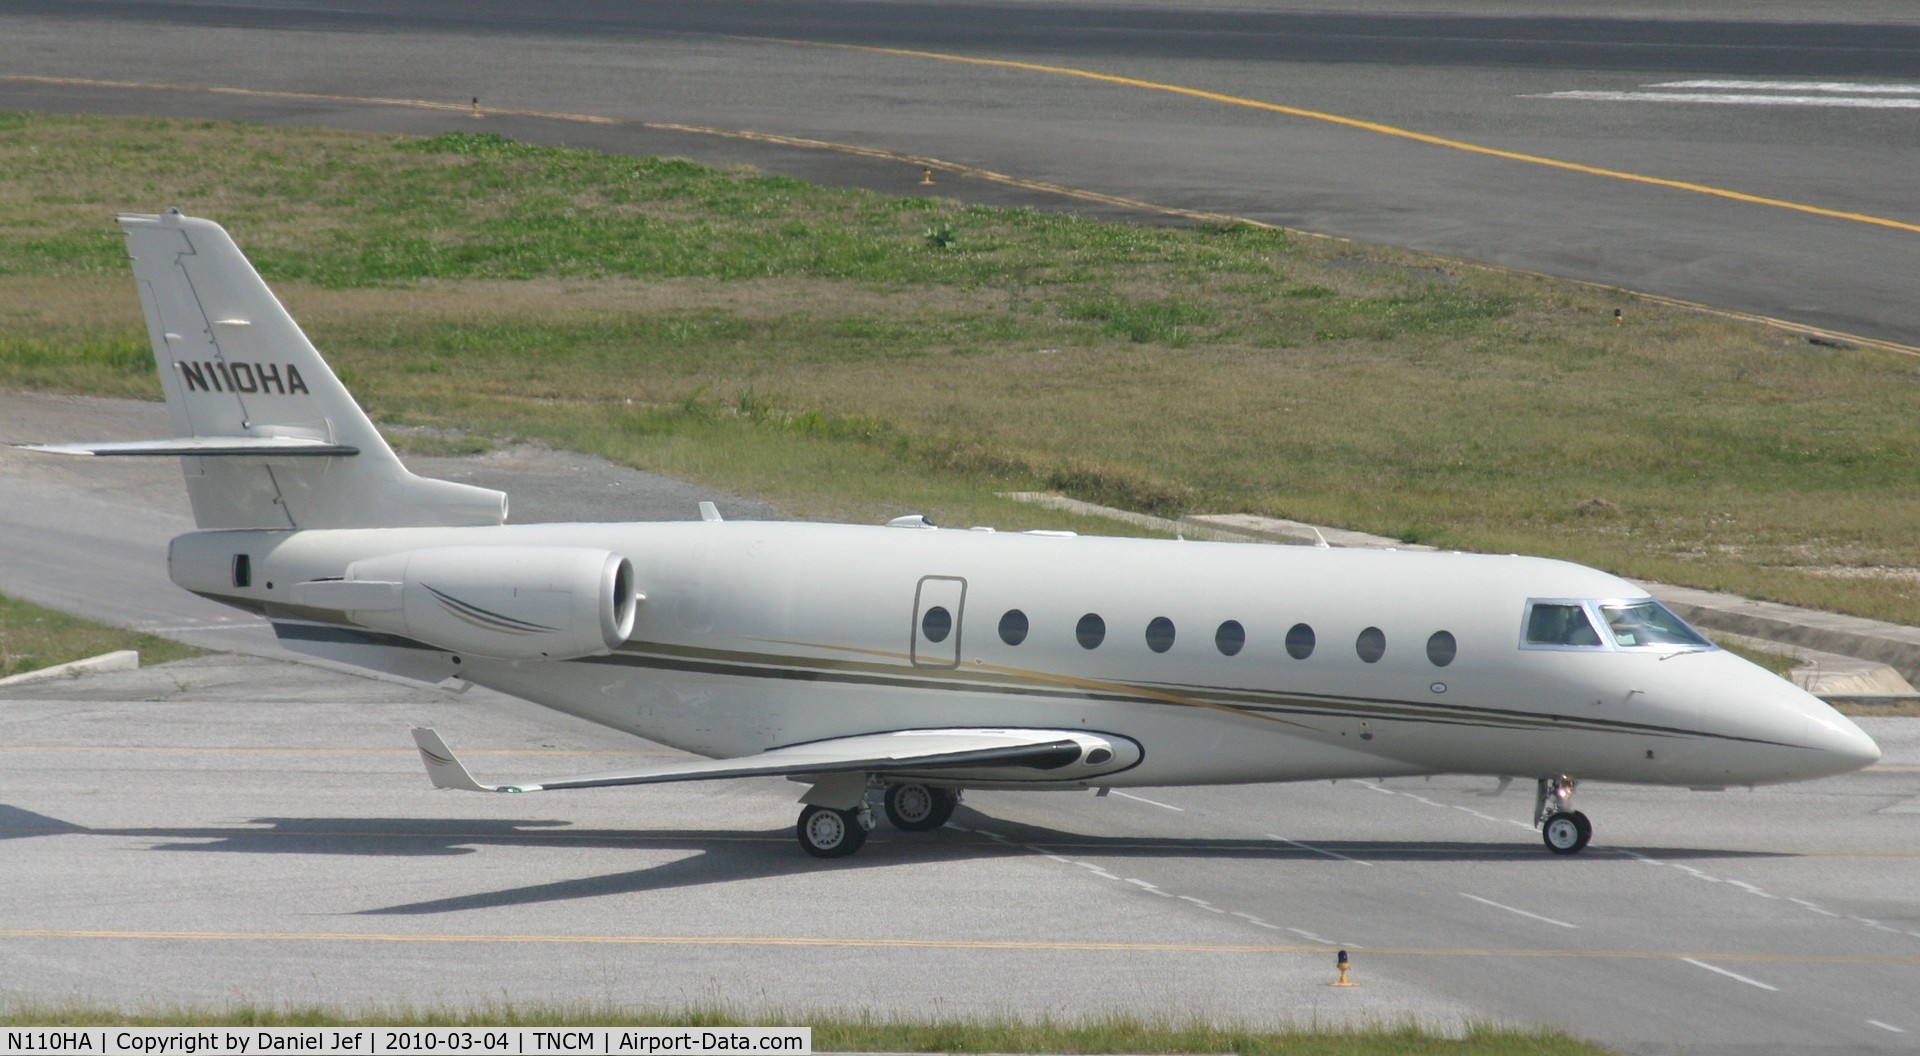 N110HA, 2001 Israel Aircraft Industries Gulfstream 200 C/N 035, N110HA taxing on the bypass for parking